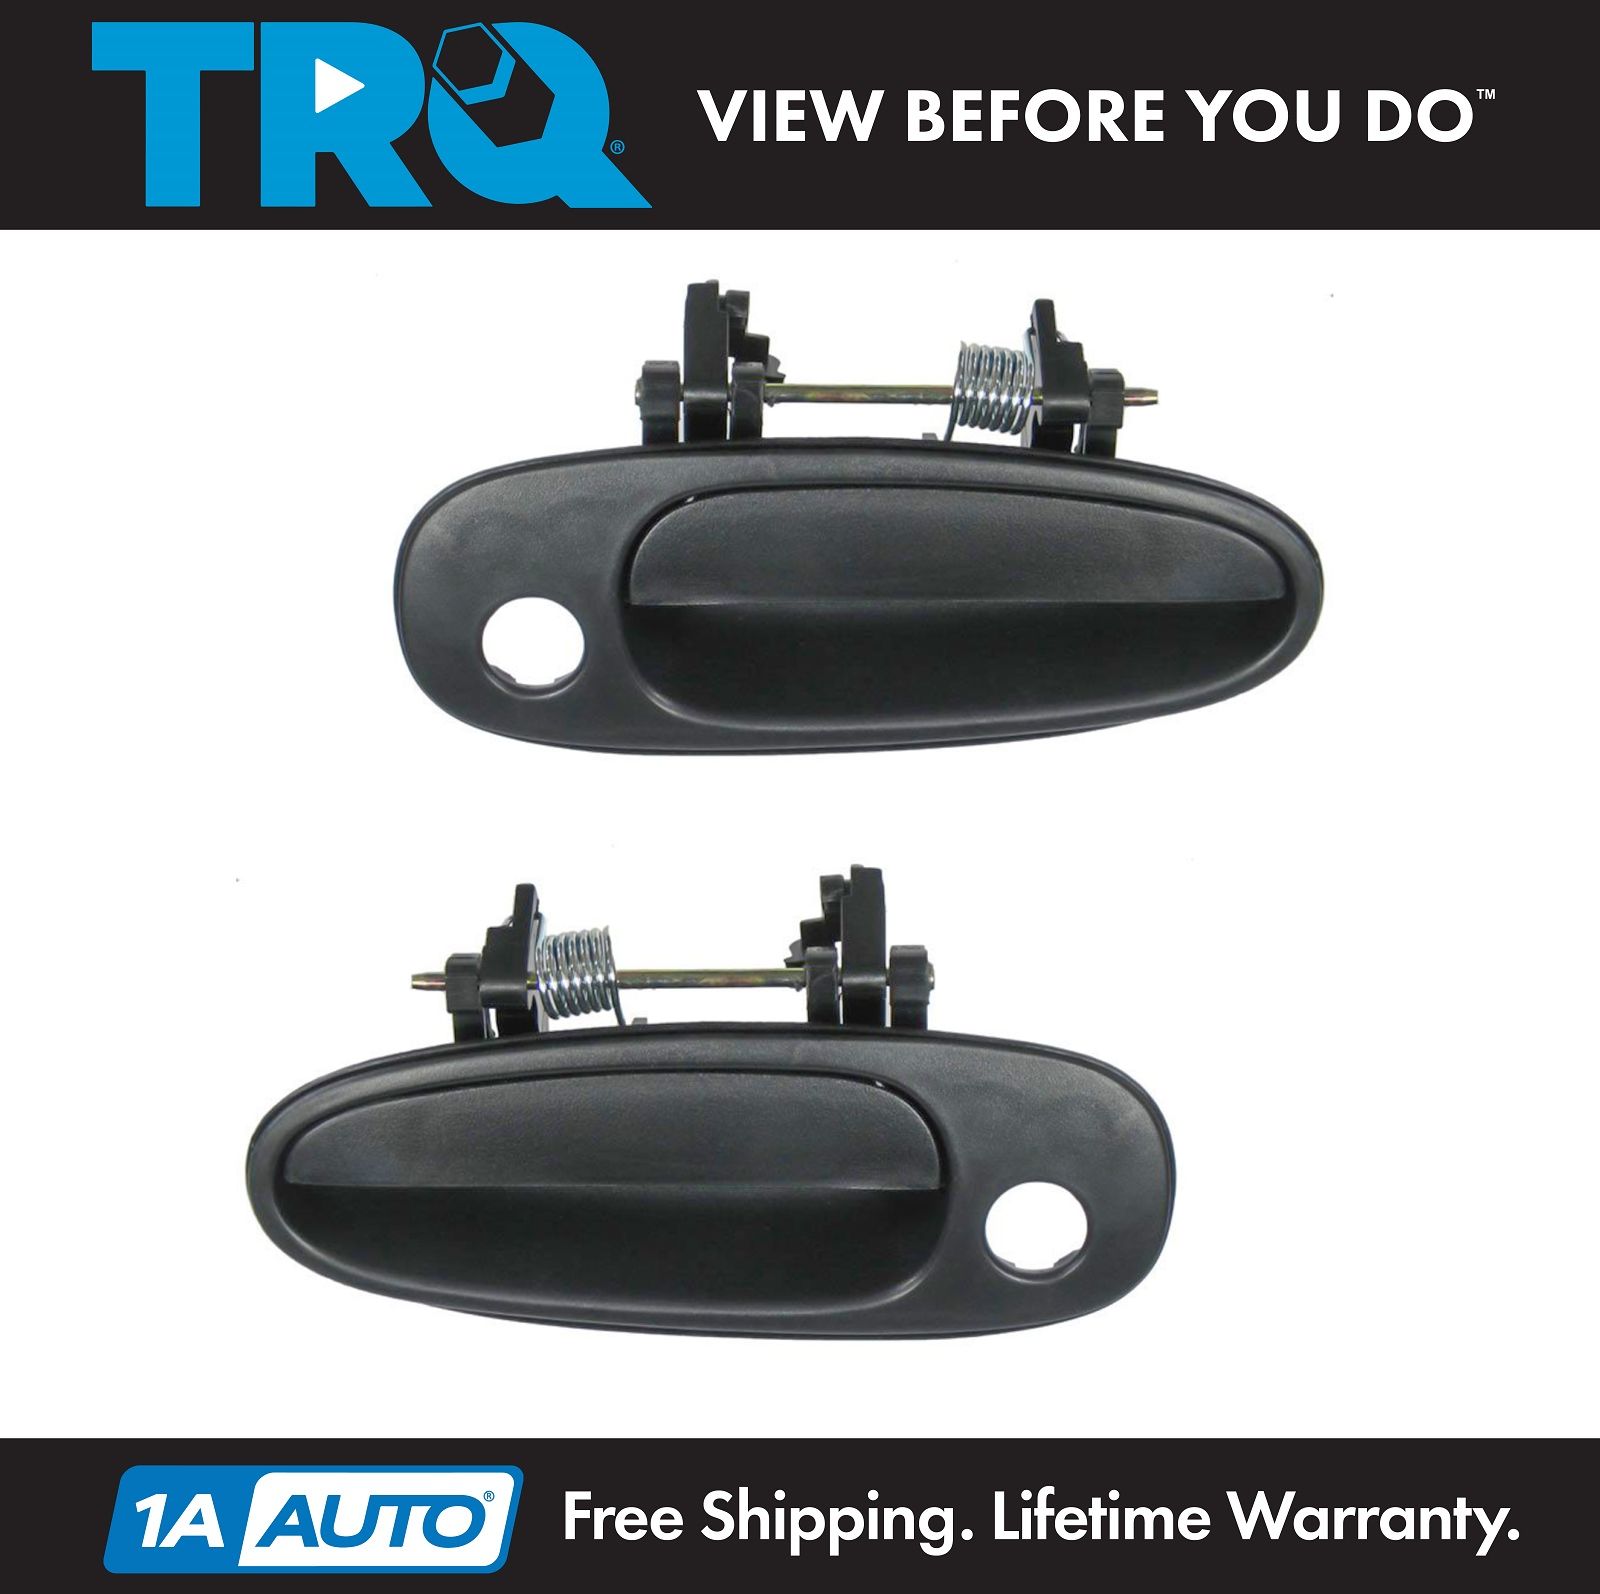 Rear Outer Outside Exterior Door Handle Left /& Right Pair Set for Corolla Prizm